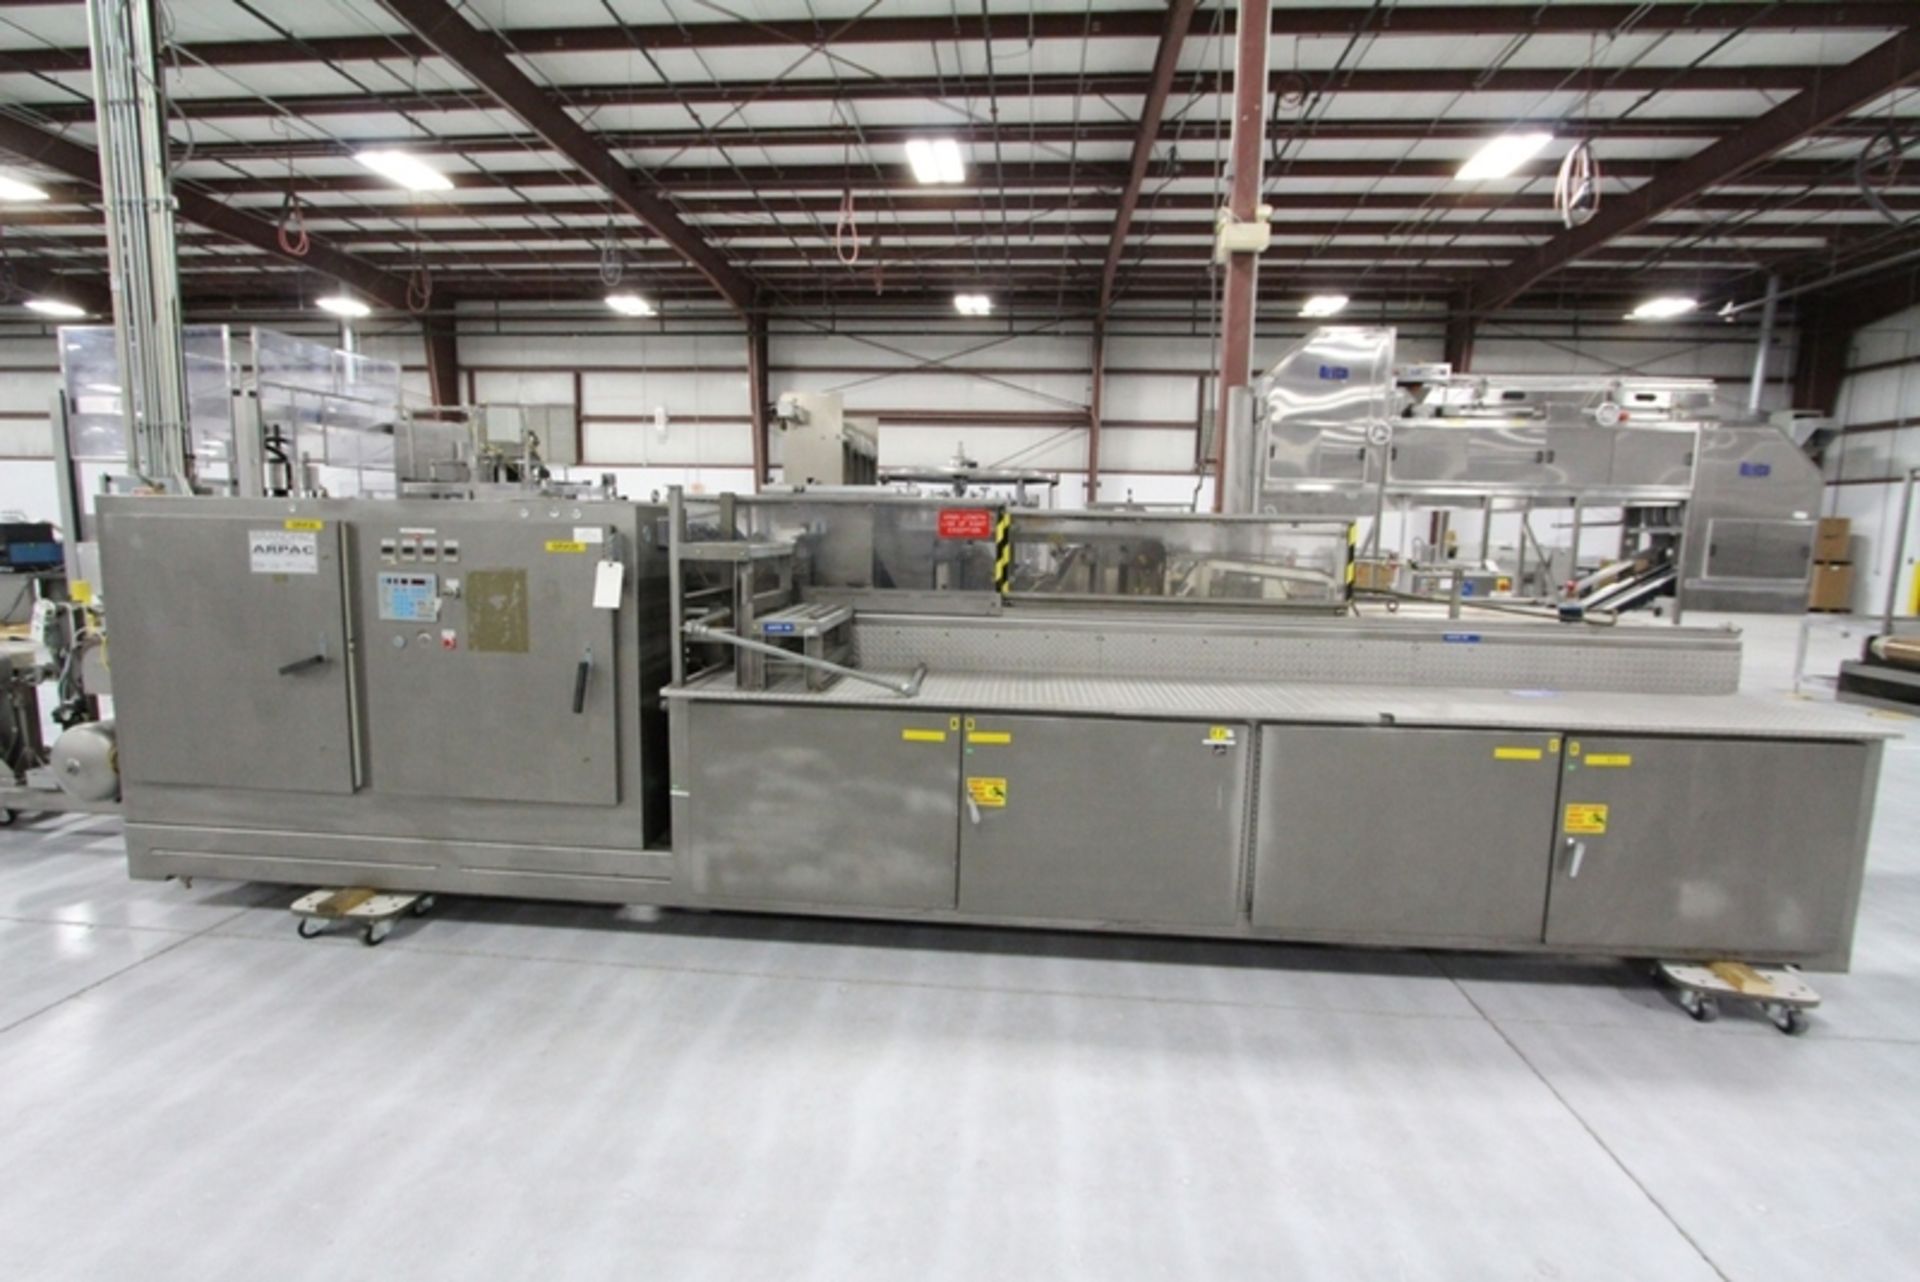 Arpac Shrink Wrapper Bundler with Heat Tunnel Automatic Wraps Bottles/Cans with Clear or Print - Image 3 of 9